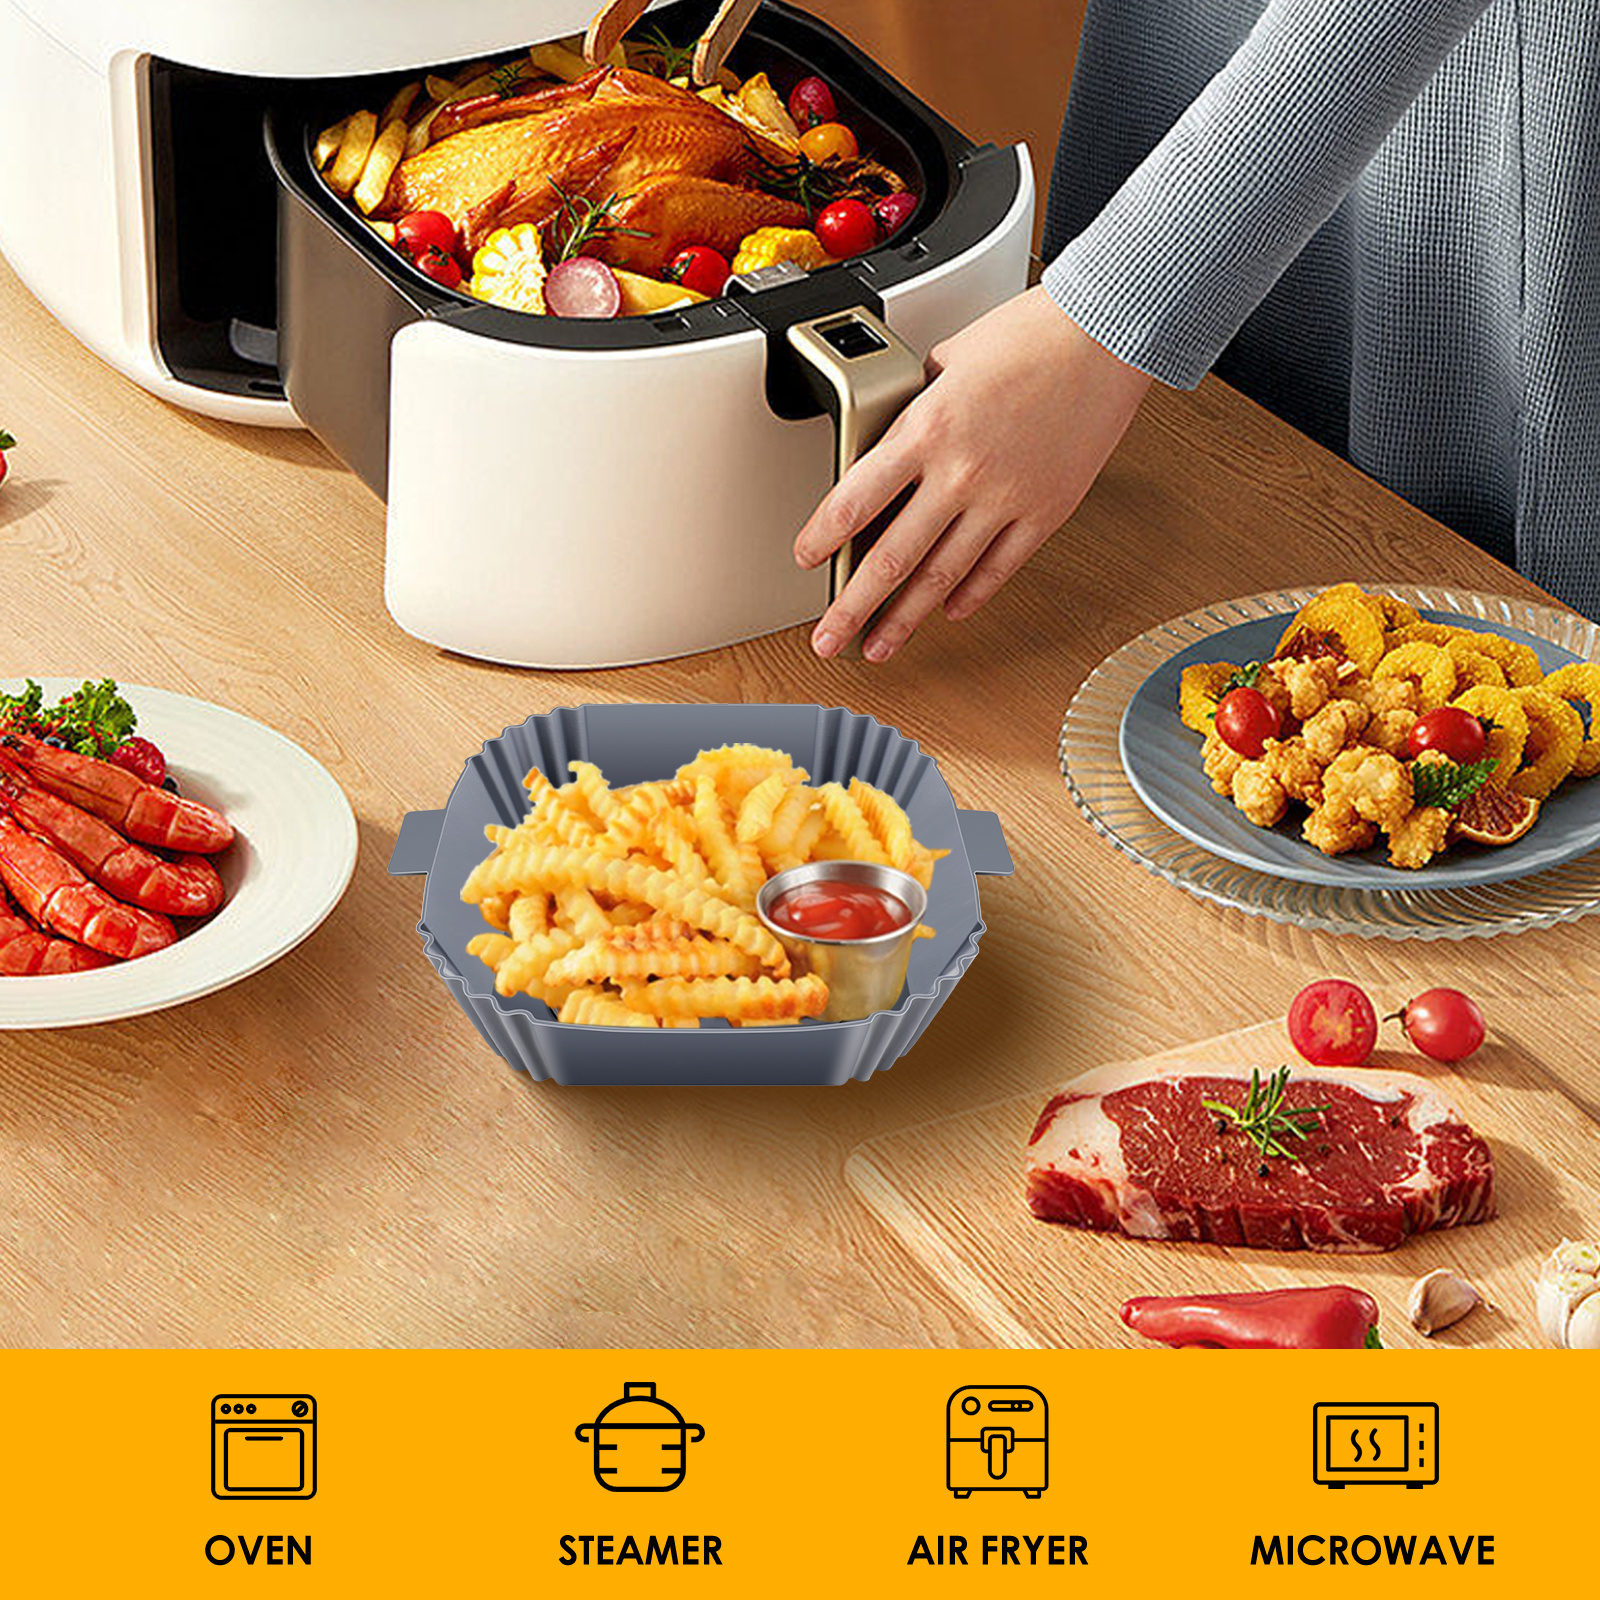 3pcs, Silicone Air Fryer Liners (7.09''), Air Fryer Liner Pots, Silicone  Basket Bowls, Reusable Baking Trays, Oven Accessories, Baking Tools,  Kitchen Gadgets, Kitchen Accessories, Home Kitchen Items